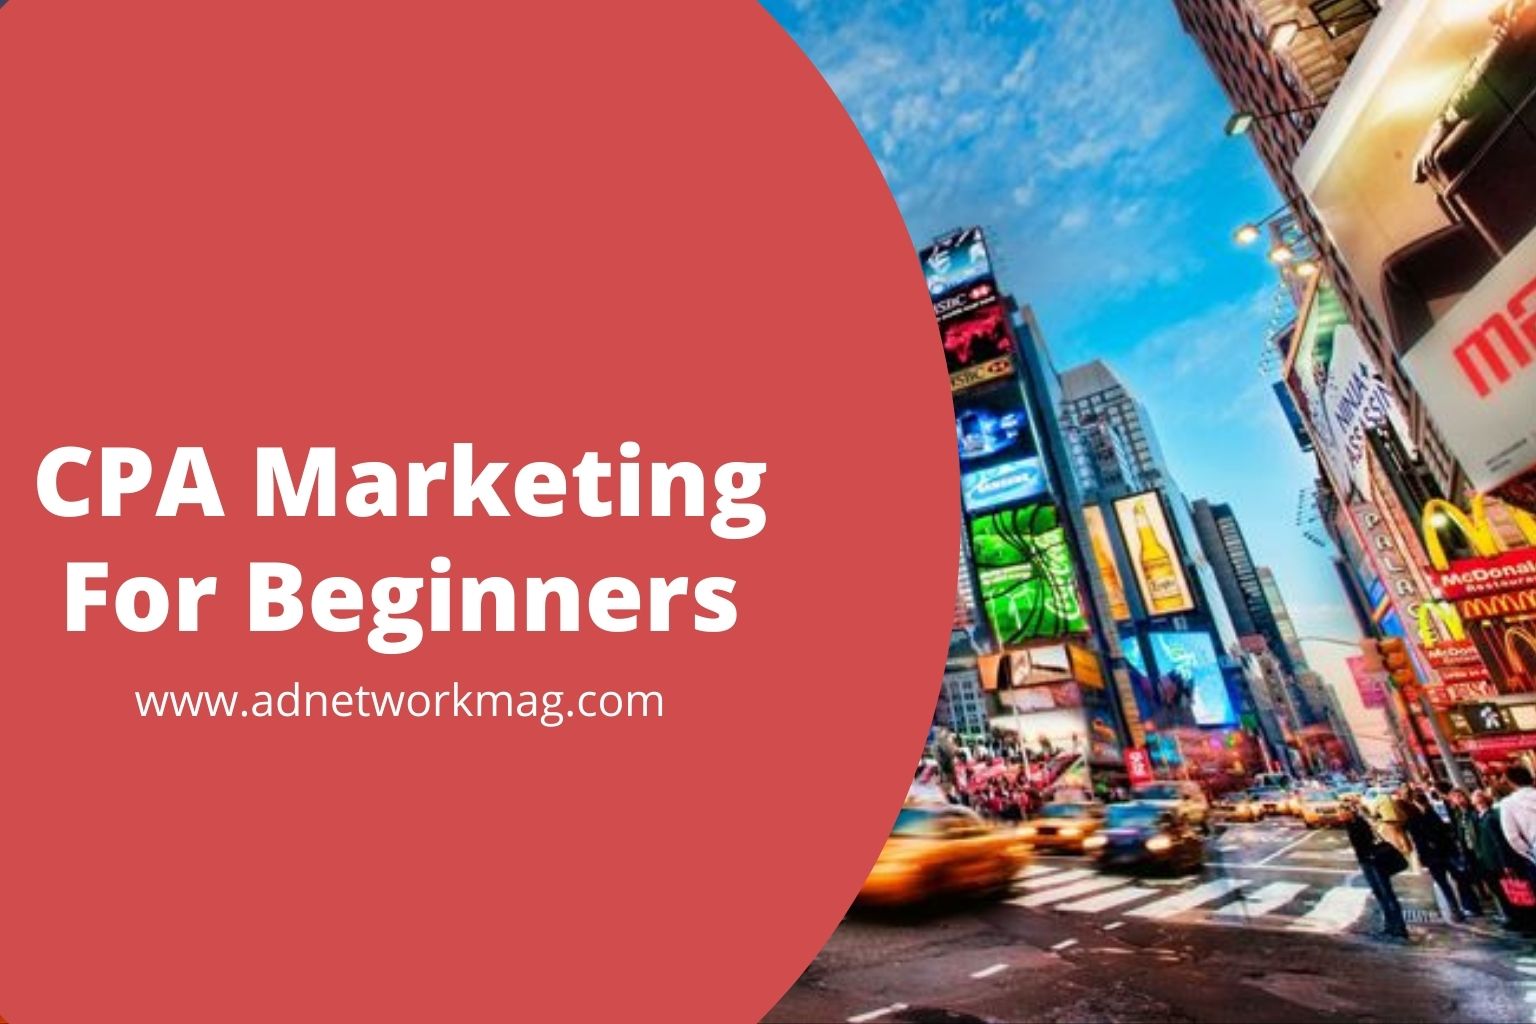 CPA Marketing For Beginners